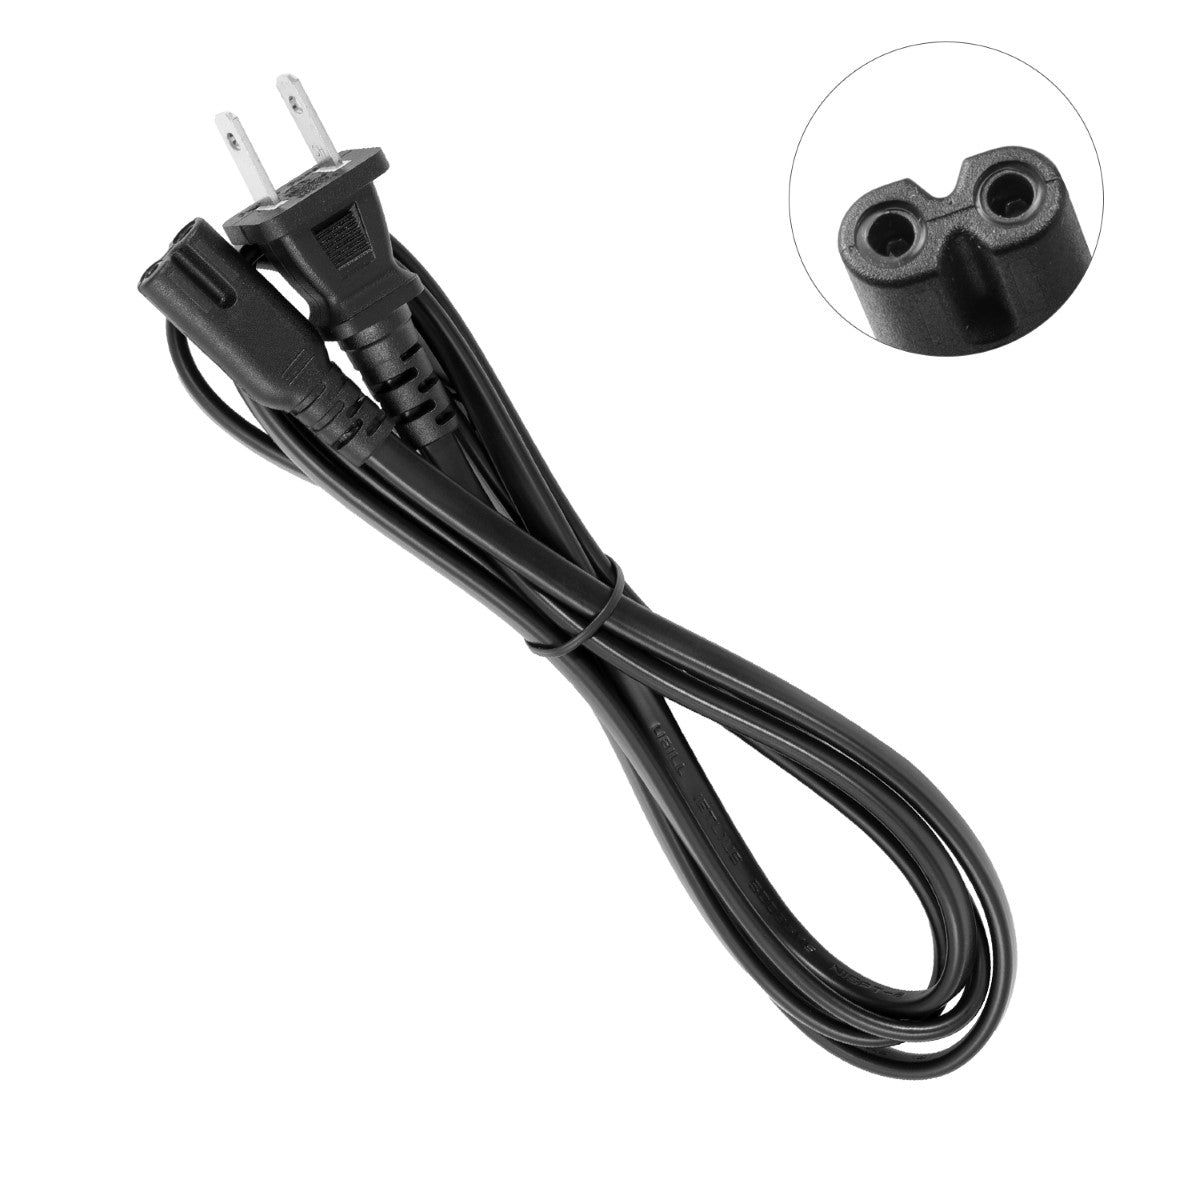 Power Cable for HP DeskJet Plus 4152 All-in-One Printer.